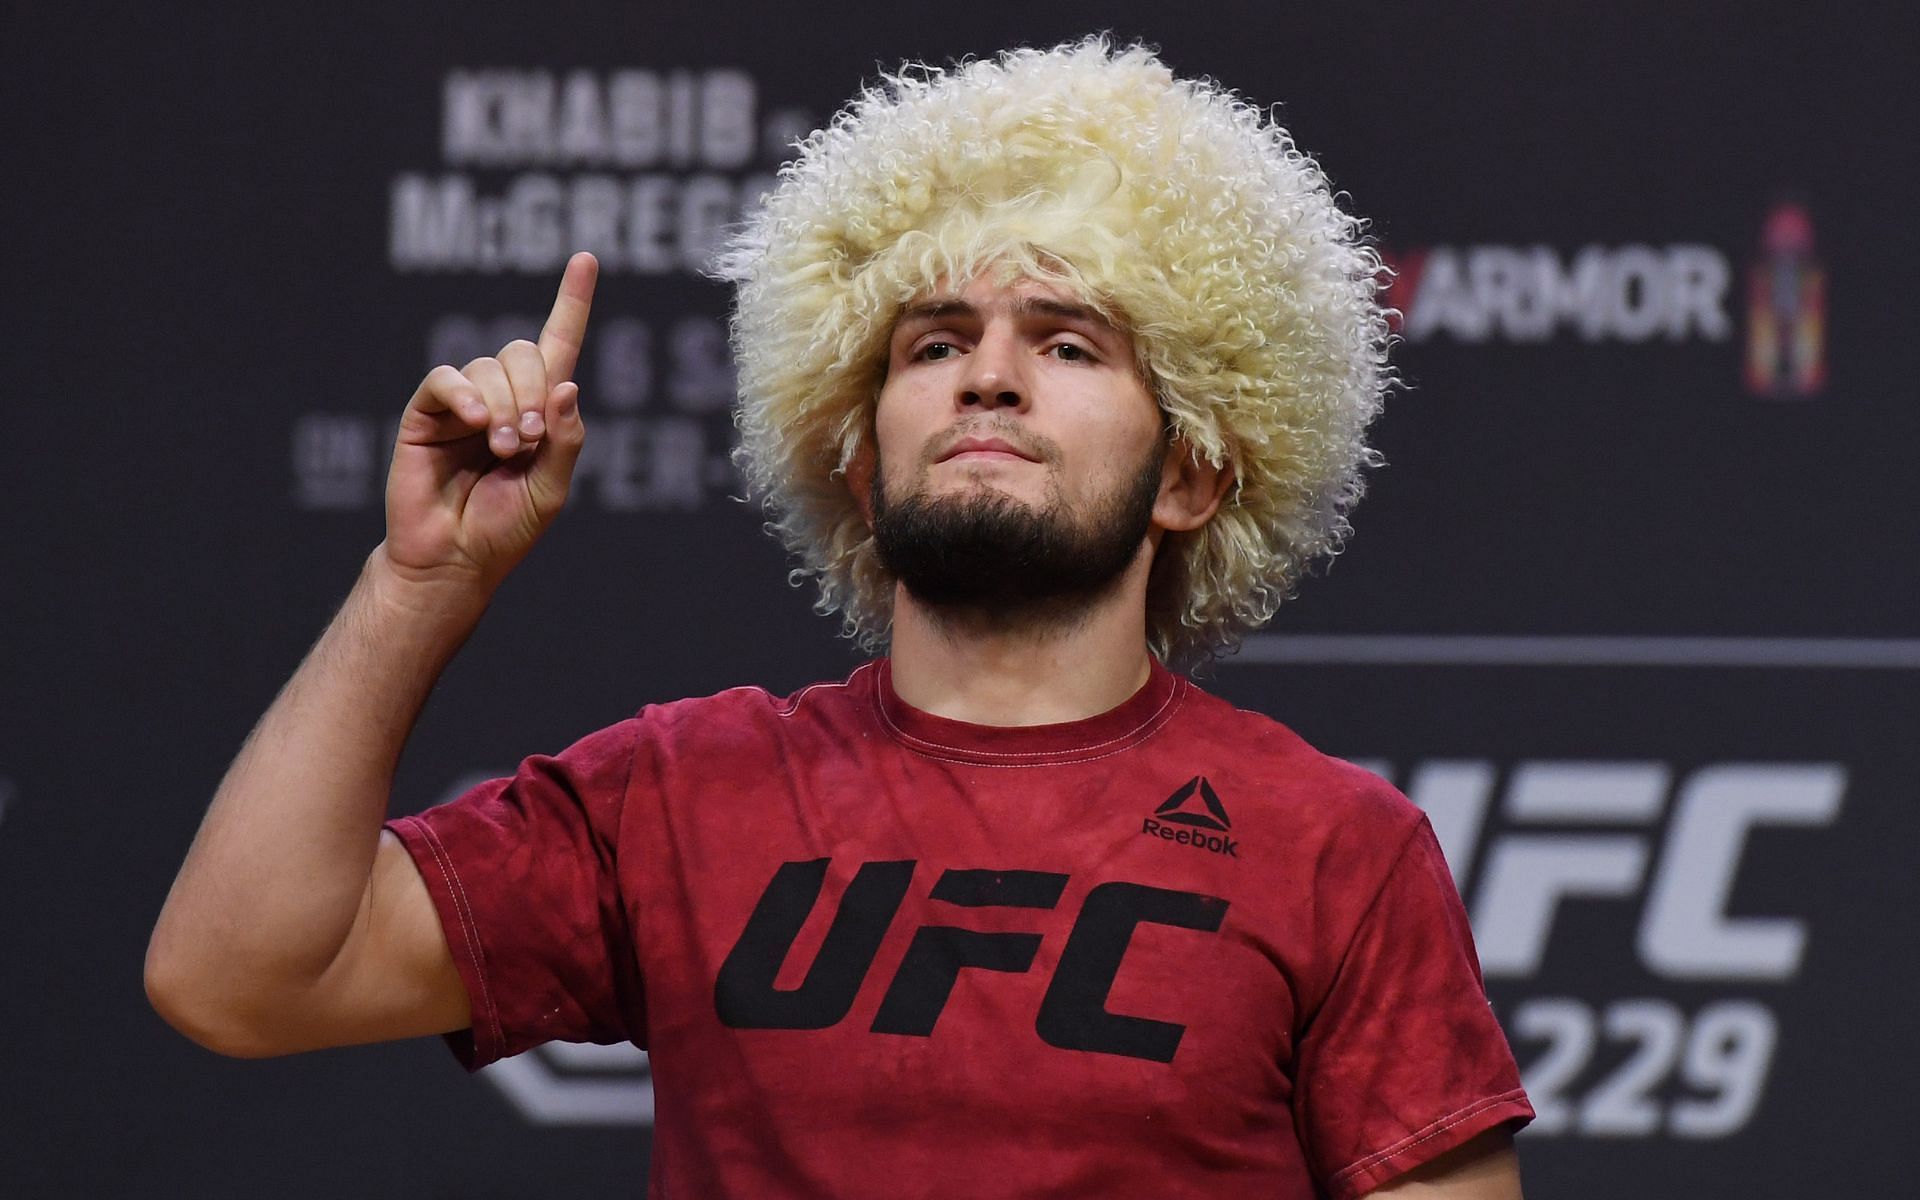 Khabib Nurmagomedov is widely regarded as one of the greatest MMA fighters of all time